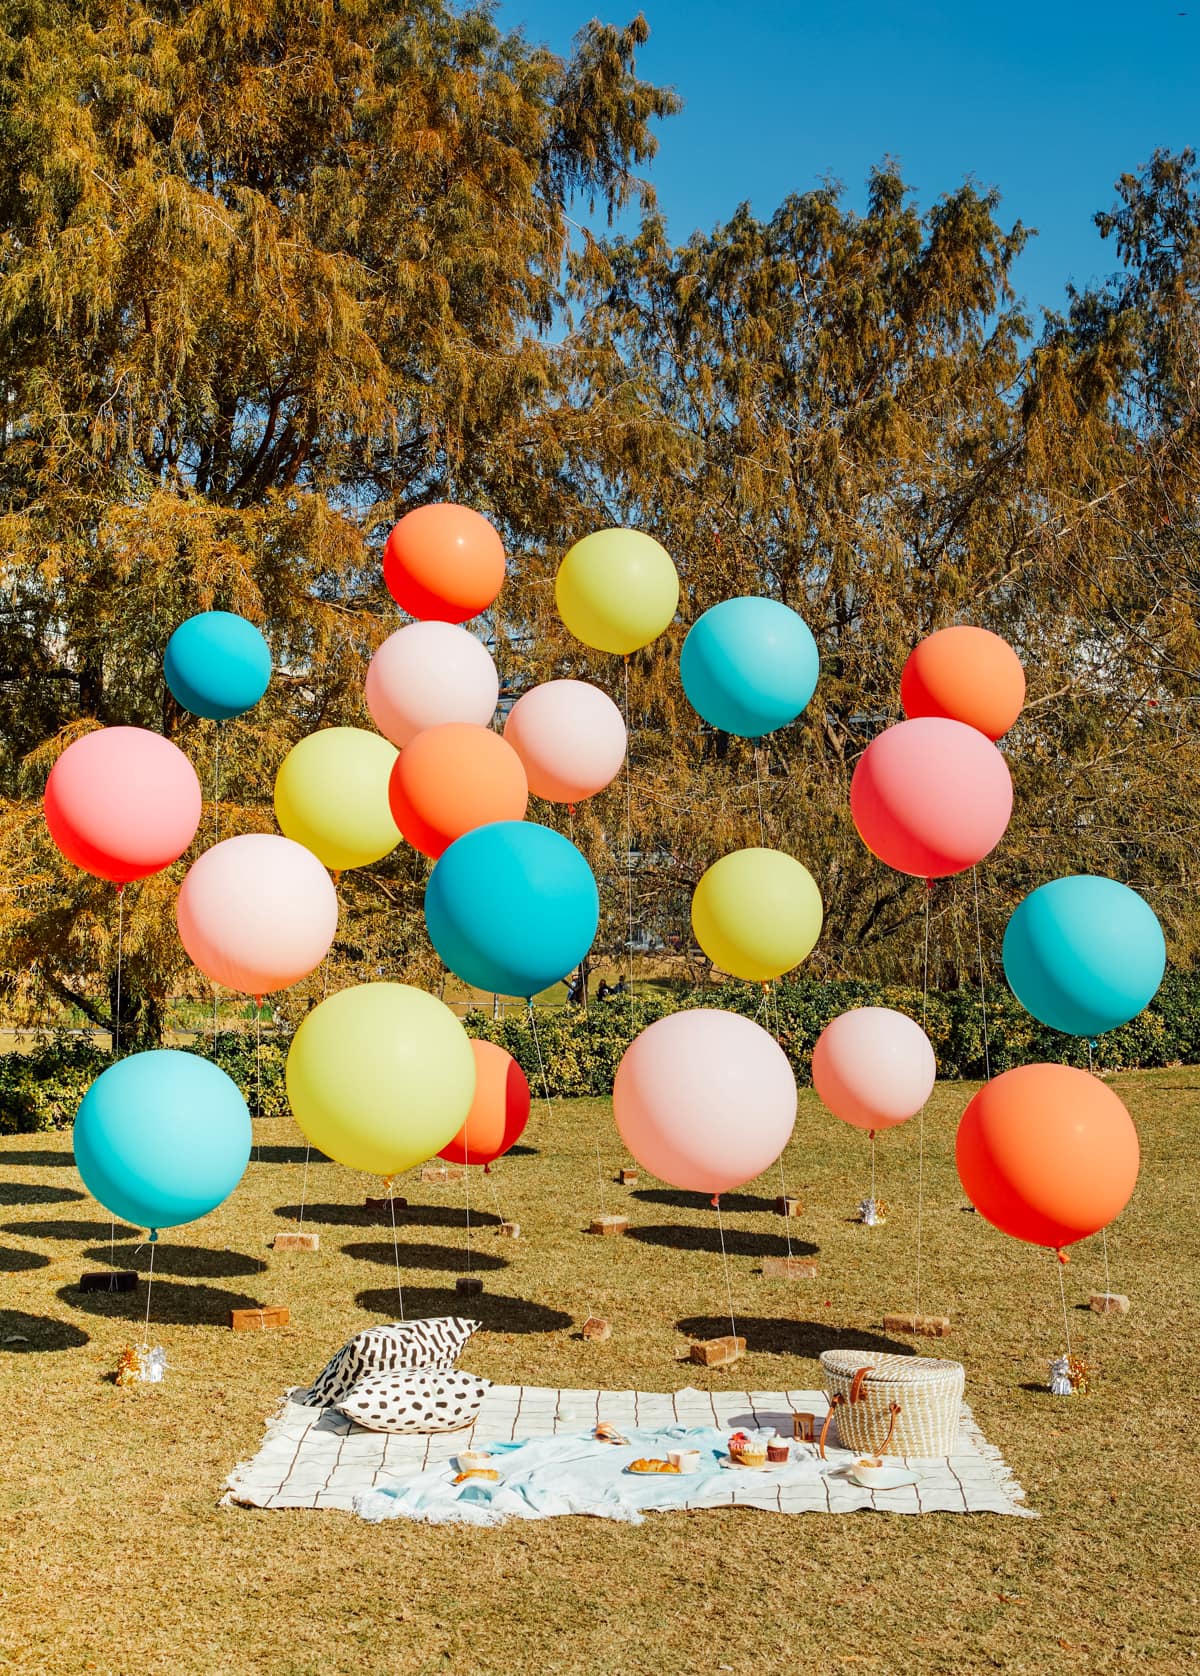 Epic balloons in the park! - Things I Didn't Know About Basic Financial Planning + Insurance Until Having A Family by top Houston lifestyle blogger Ashley Rose of Sugar & Cloth - #family #budget #budgeting #tips #planning #finances #financial #insurance #help #guide 